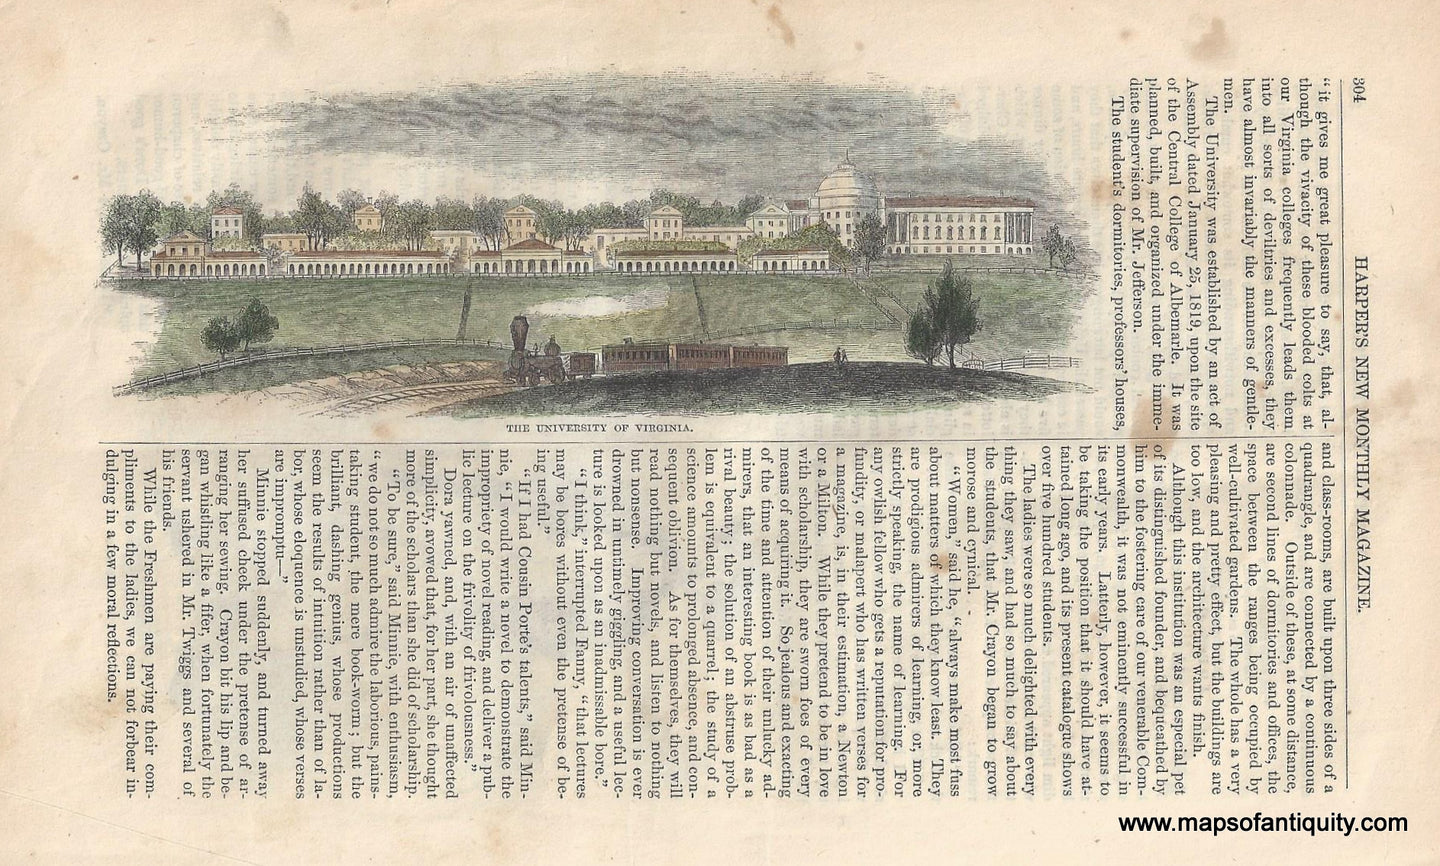 Antique-Hand-Colored-Engraving-University-of-Virginia-****-Colleges-UVA-1856-Harper's-New-Monthly-Magazine-Maps-Of-Antiquity